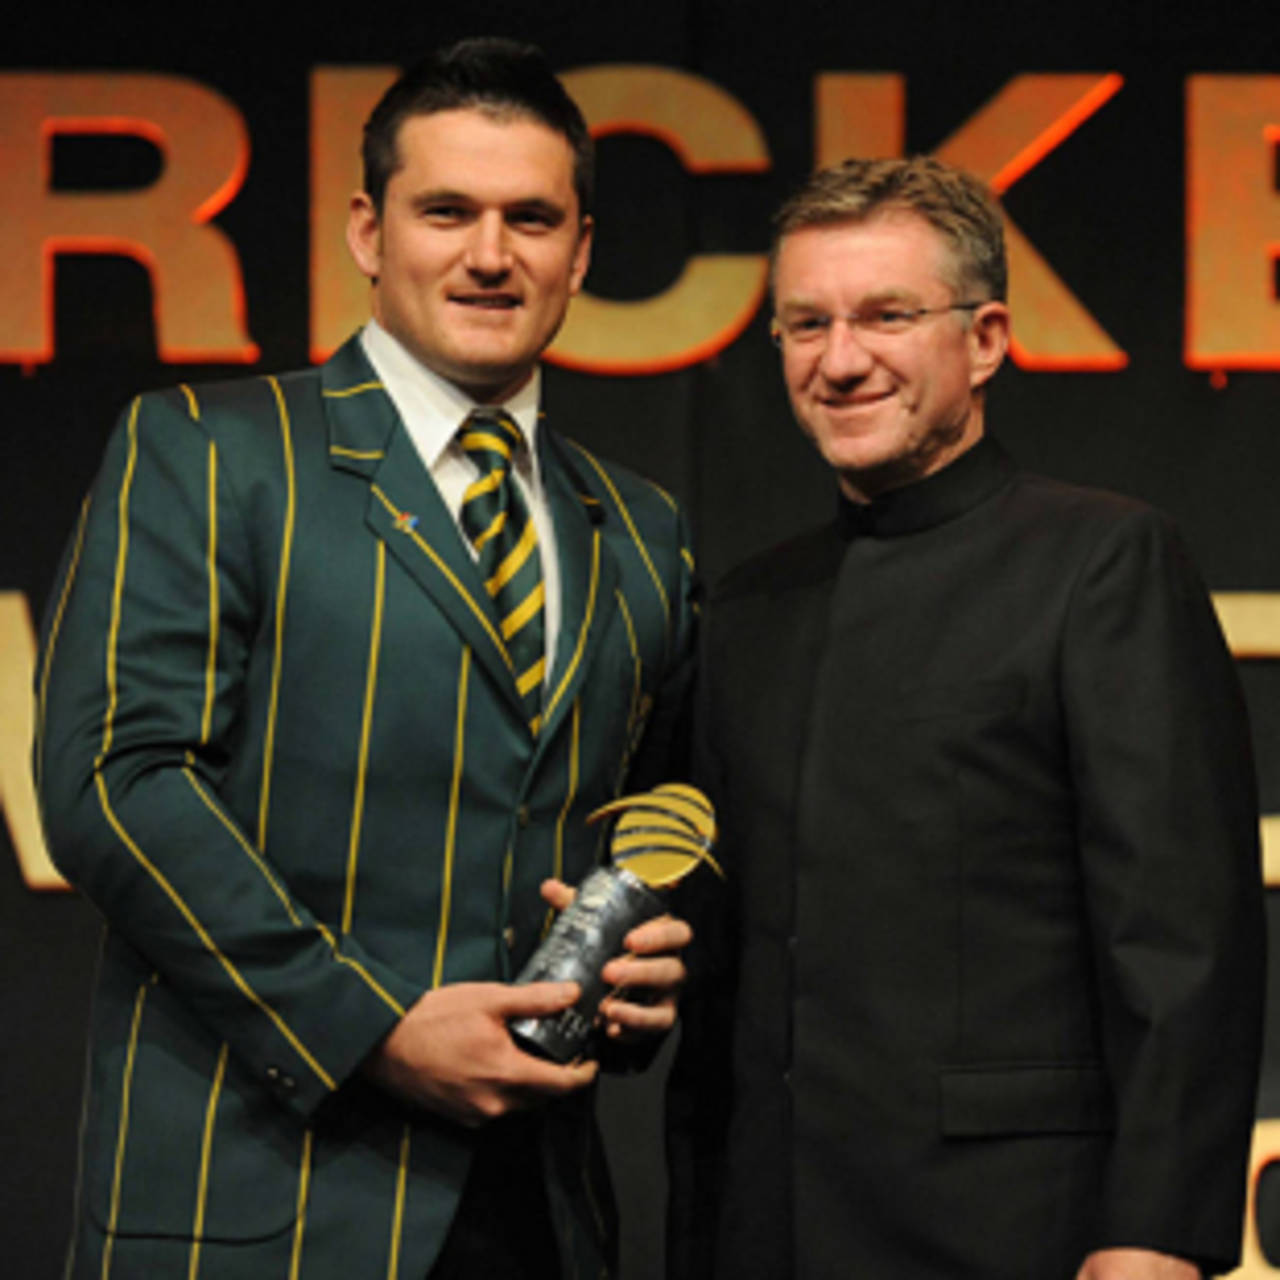 Graeme Smith receives the award for Test Cricketer of the Year at the 2009 SA Cricket Awards, Johannesburg, June 30, 2009